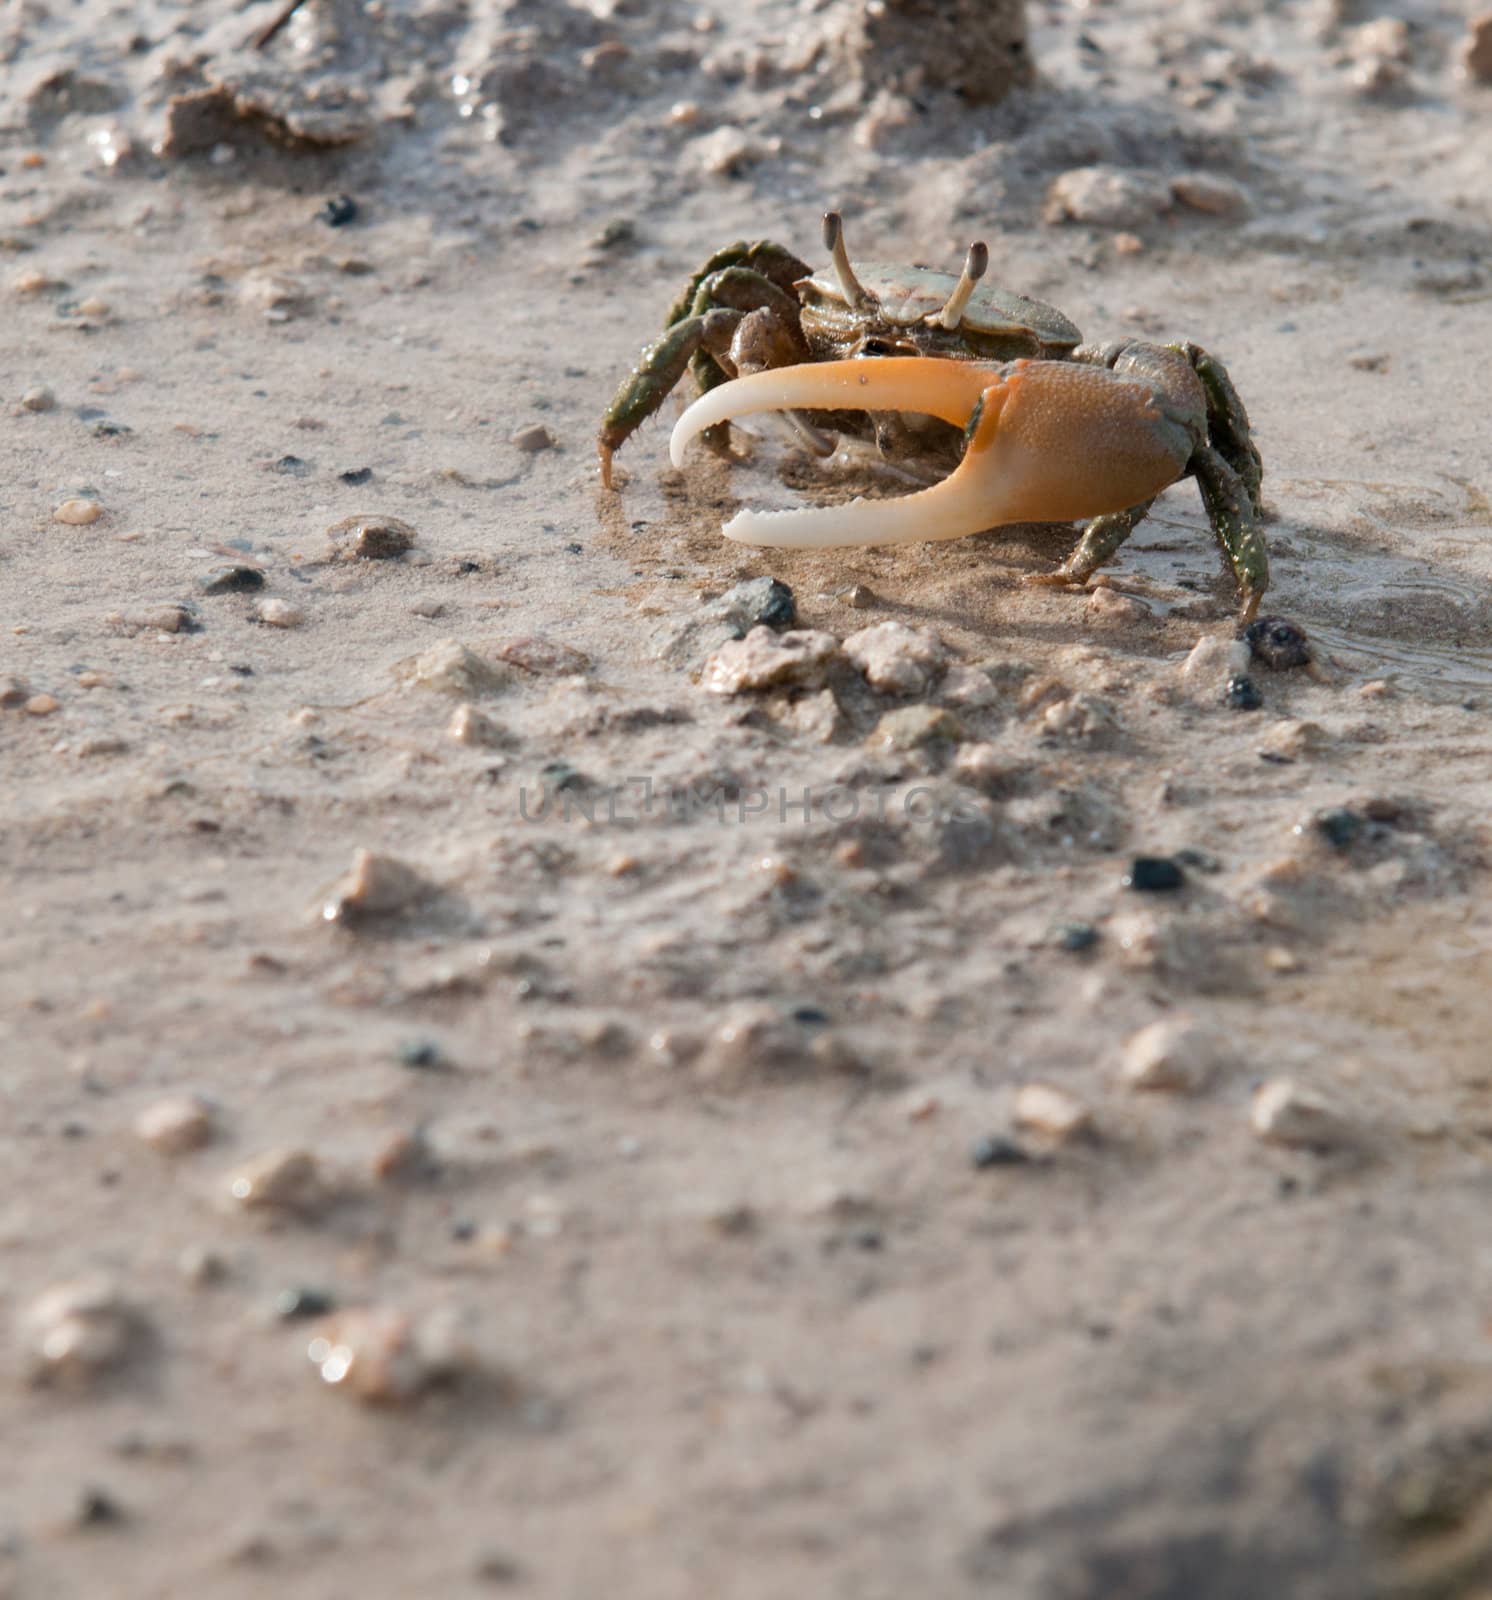 one handed crab moving in a pond (crustacean from Antigua)